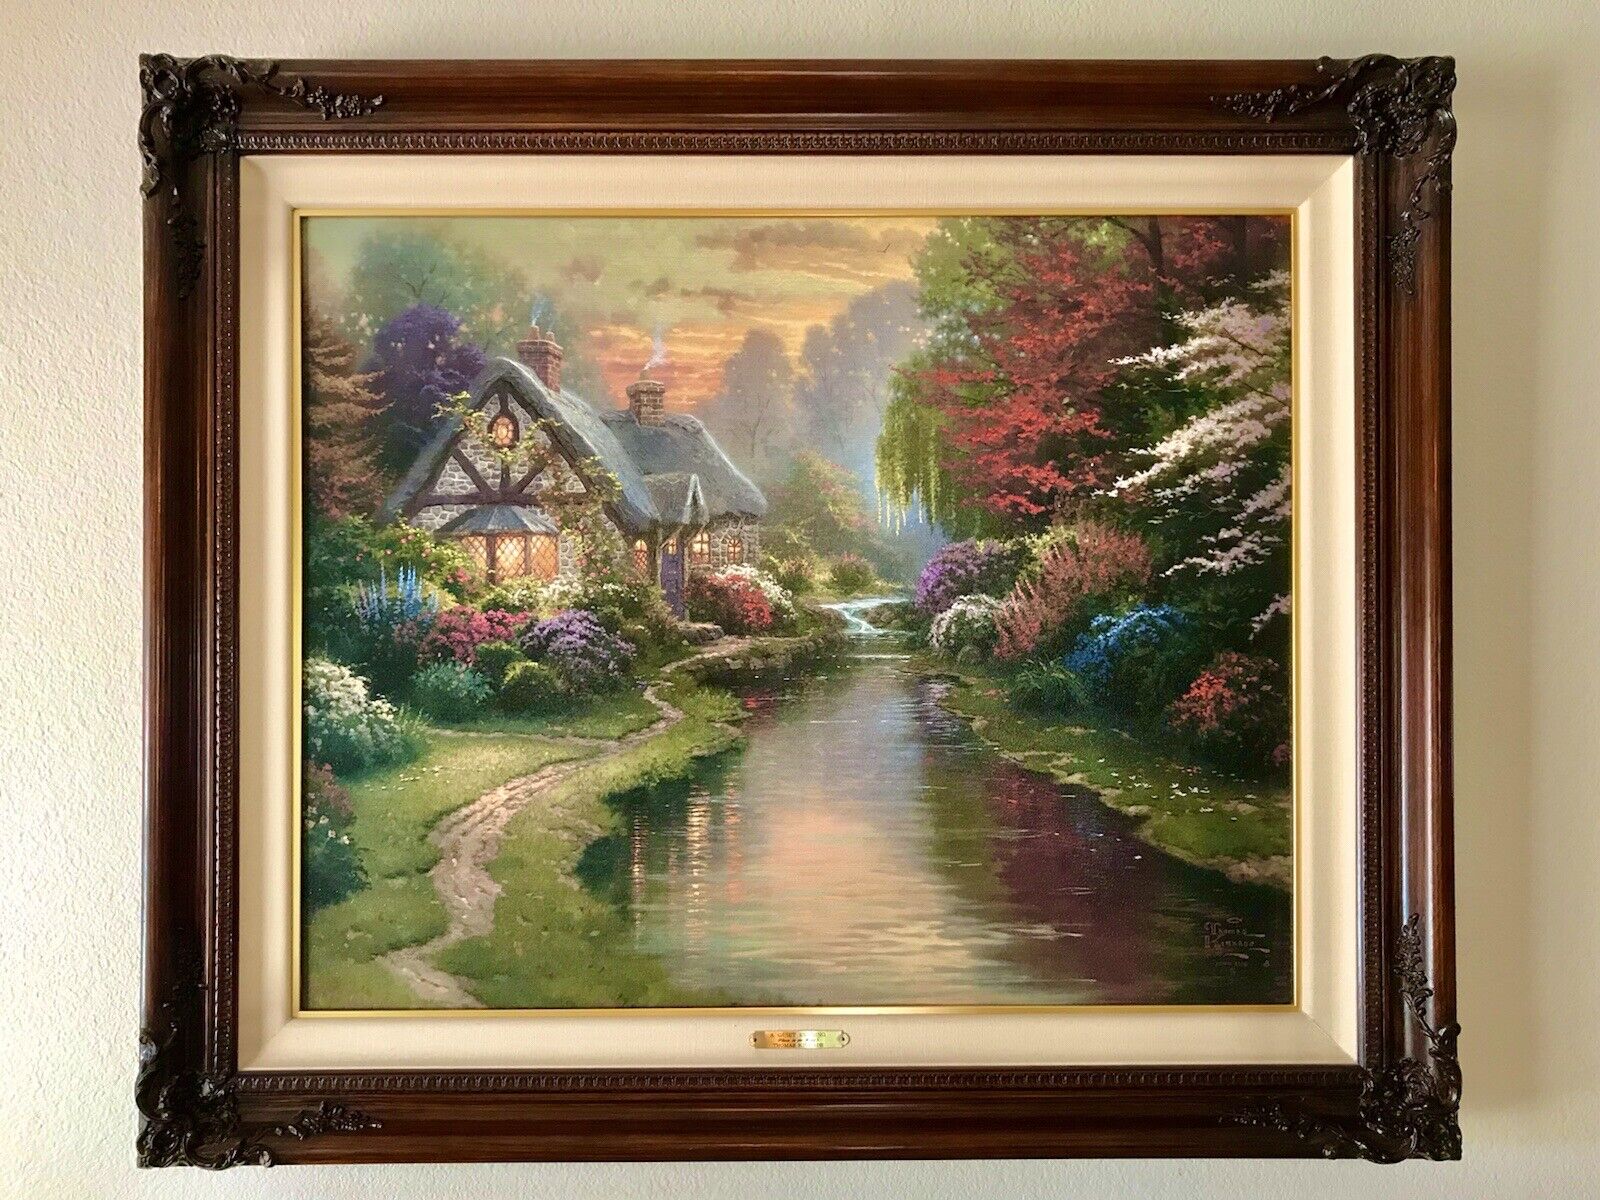 “A Quiet Evening - Places In The Heart” Thomas Kinkade 24”x30” Framed S/N Canvas